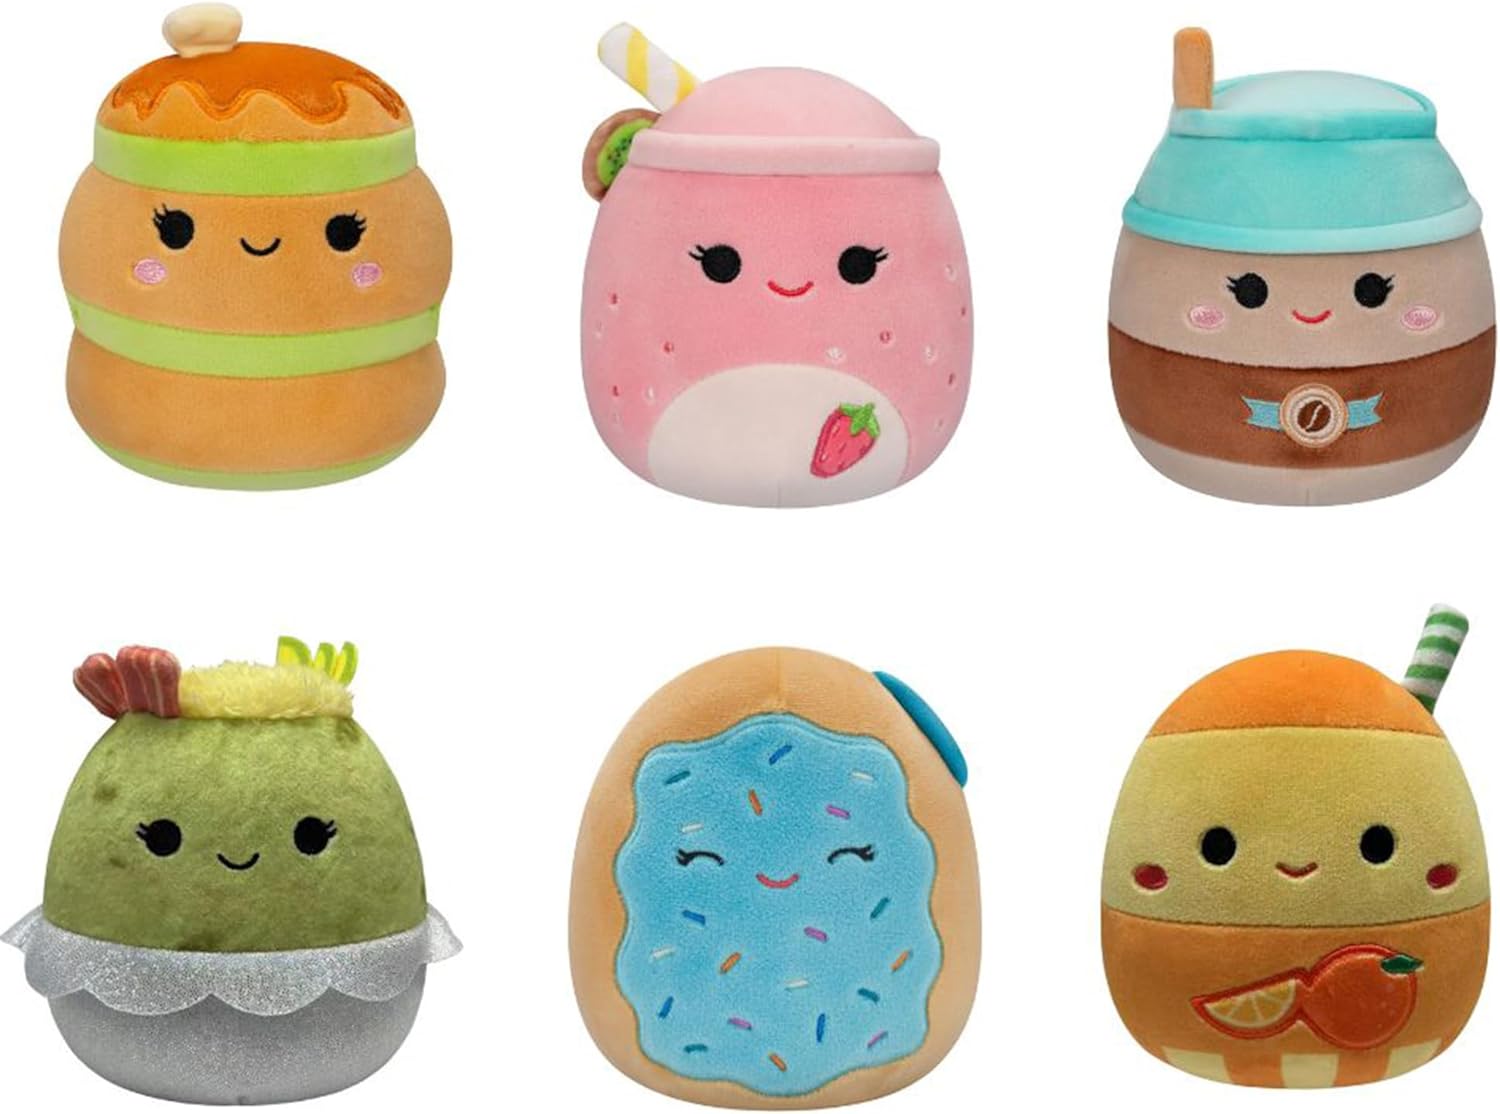 Squishmallows Original 5-Inch Scented Mystery Plush - Little Ultrasoft Official Jazwares Plush